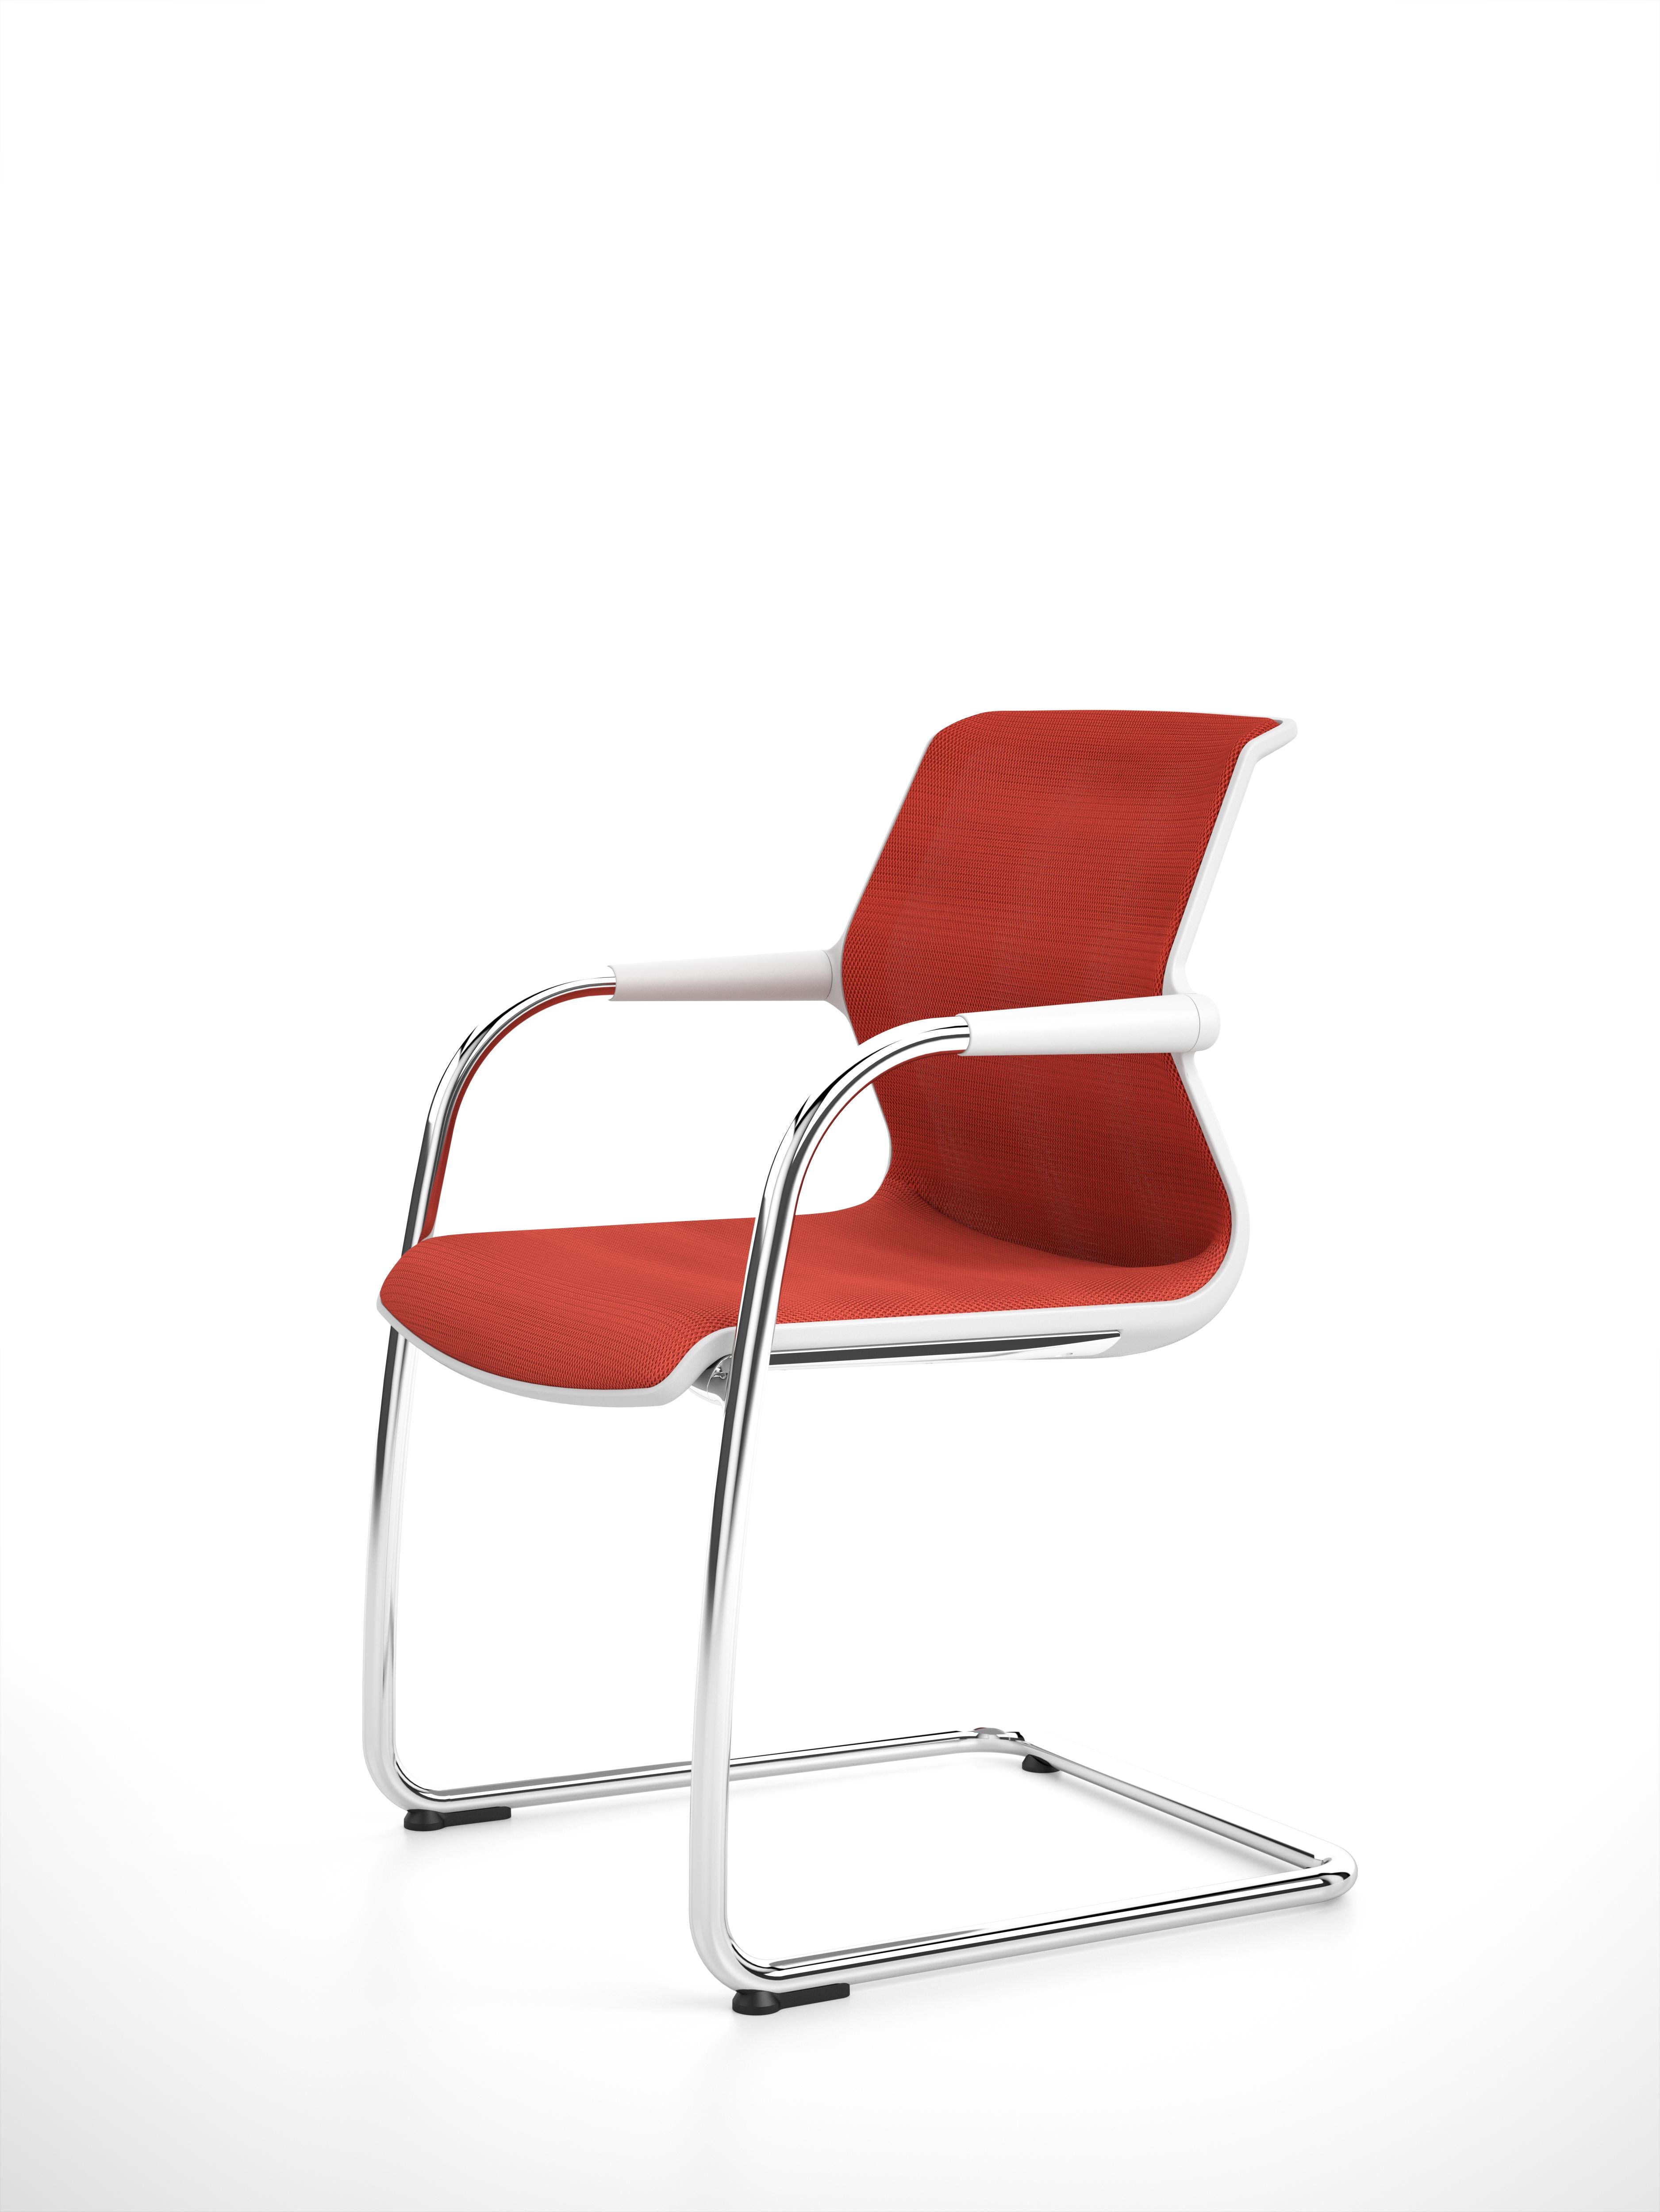 Vitra Unix Cantilever Stackable Chair in Brick Silk Mesh by Antonio Citterio (Stahl) im Angebot